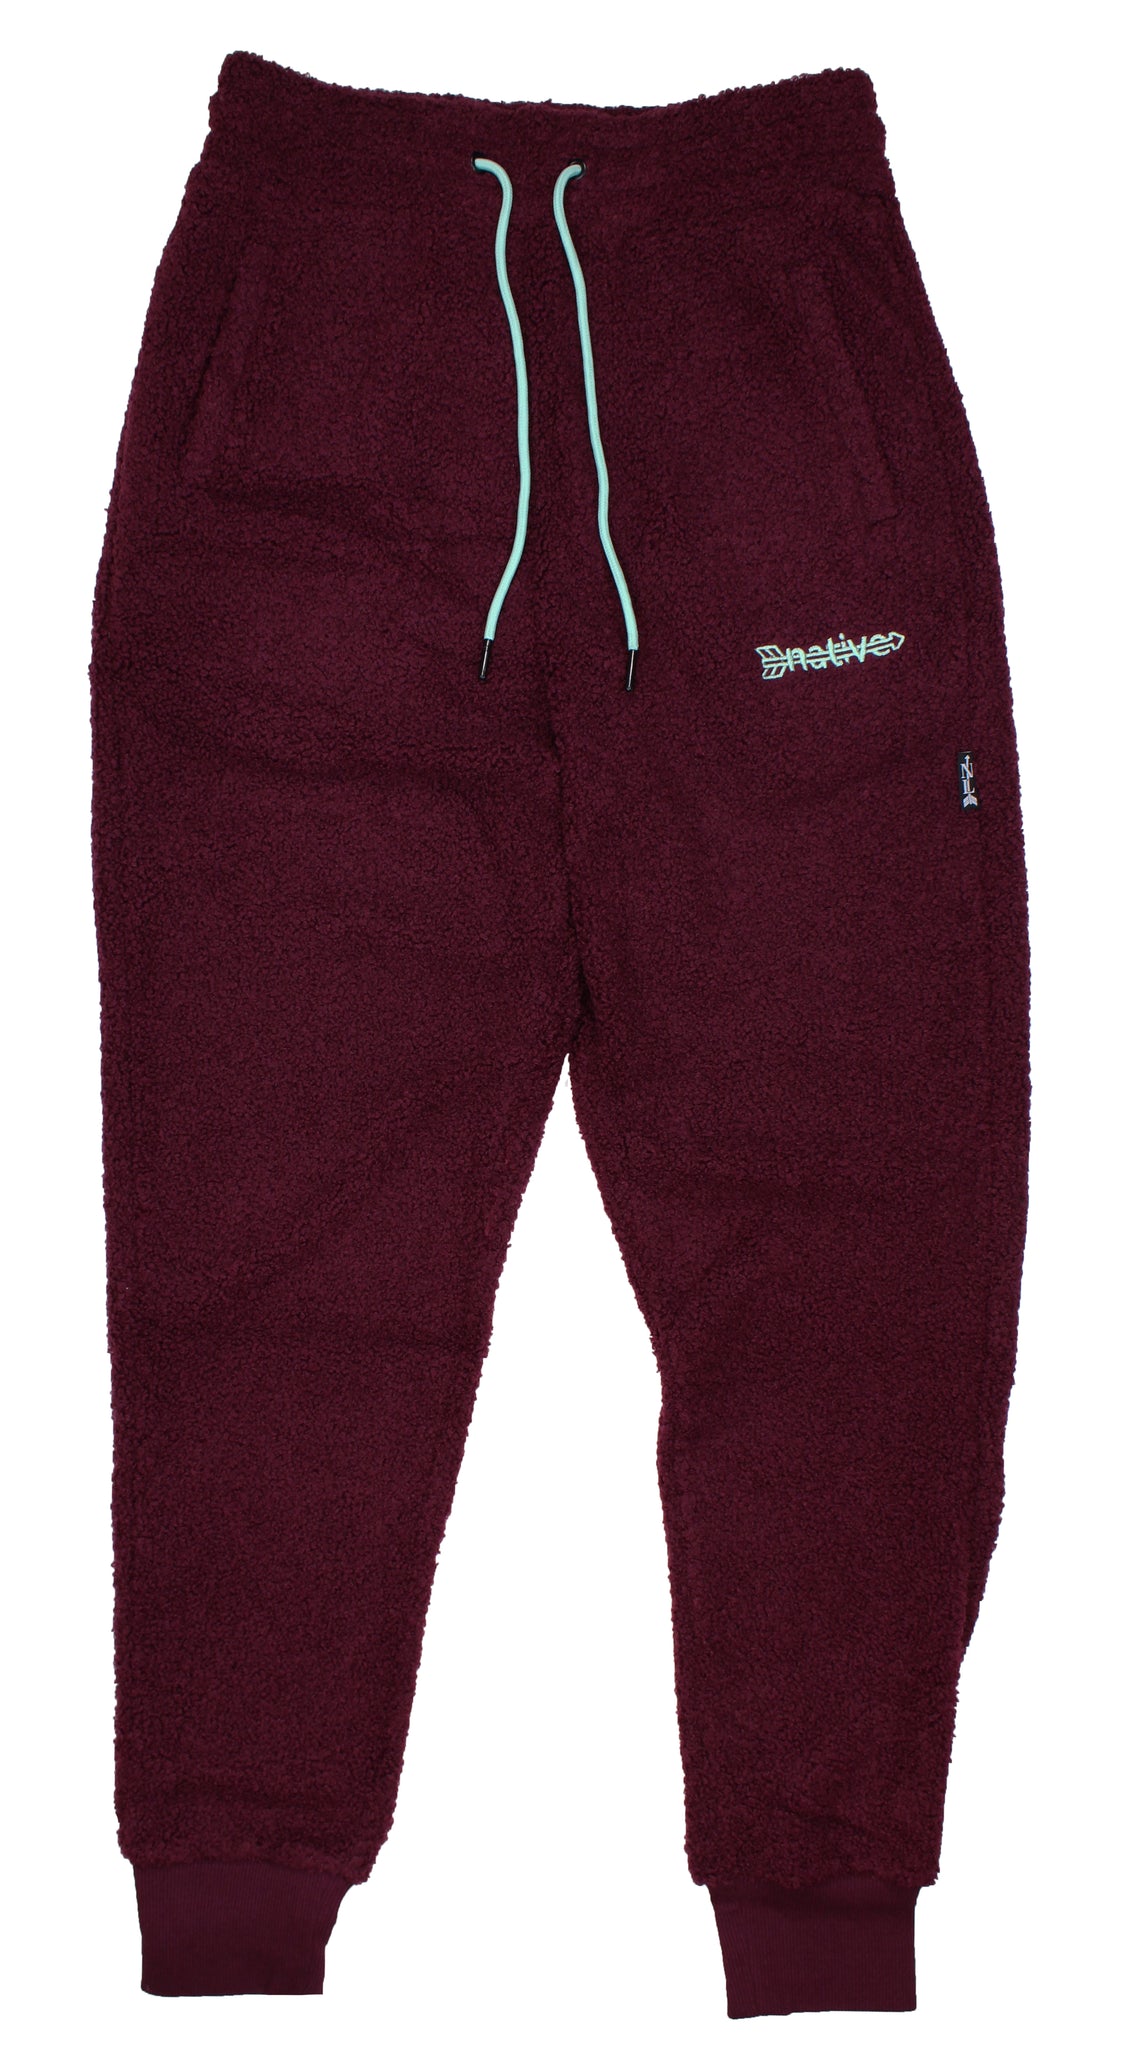 sherpa joggers in cranberry/ice blue